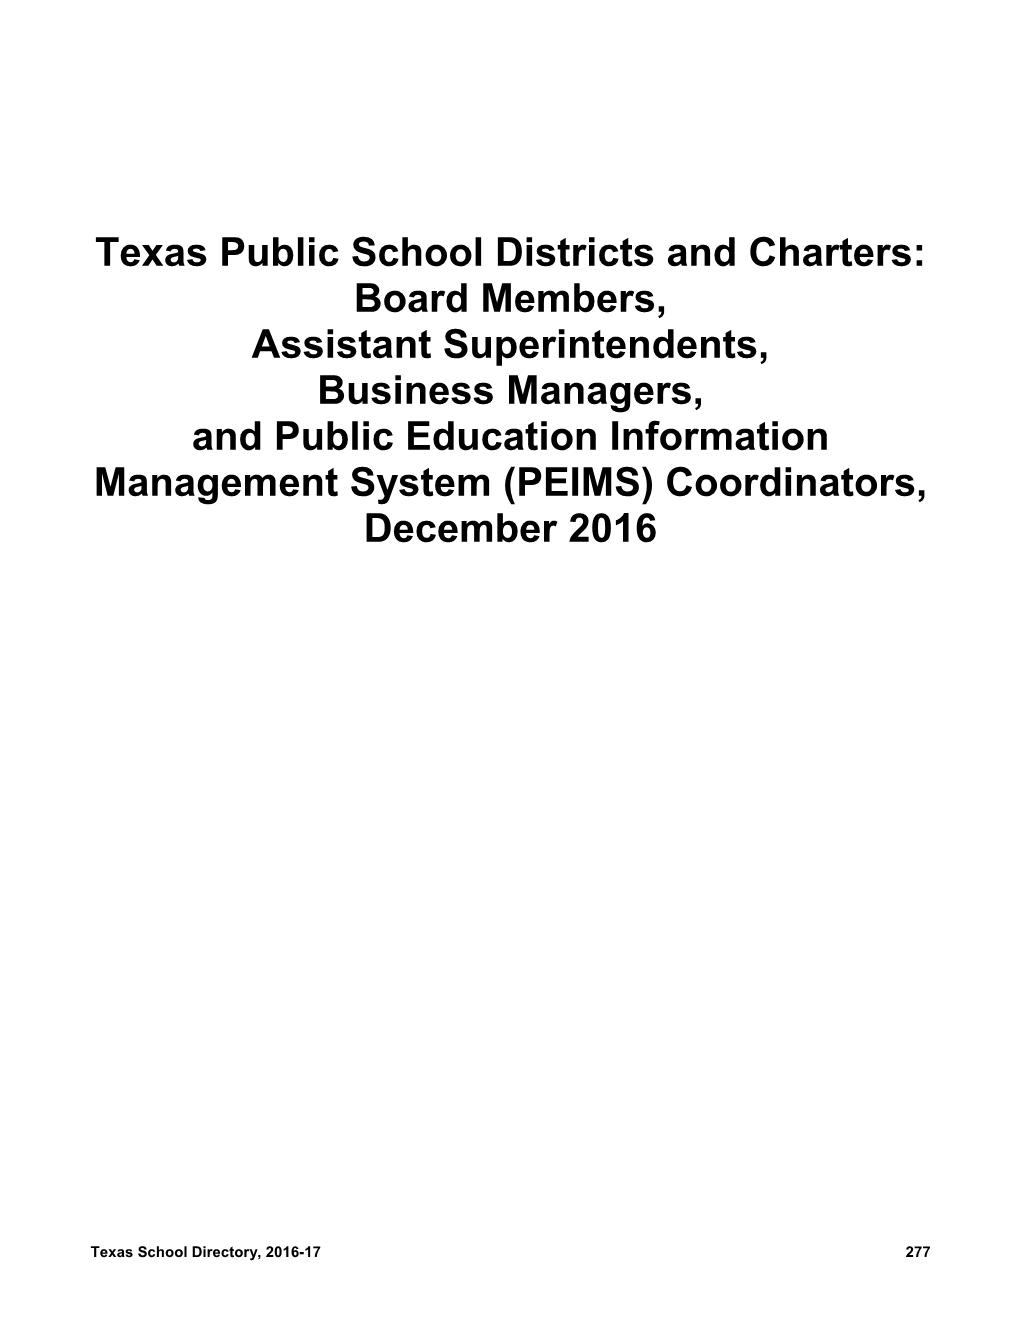 Texas Public School Districts and Charters